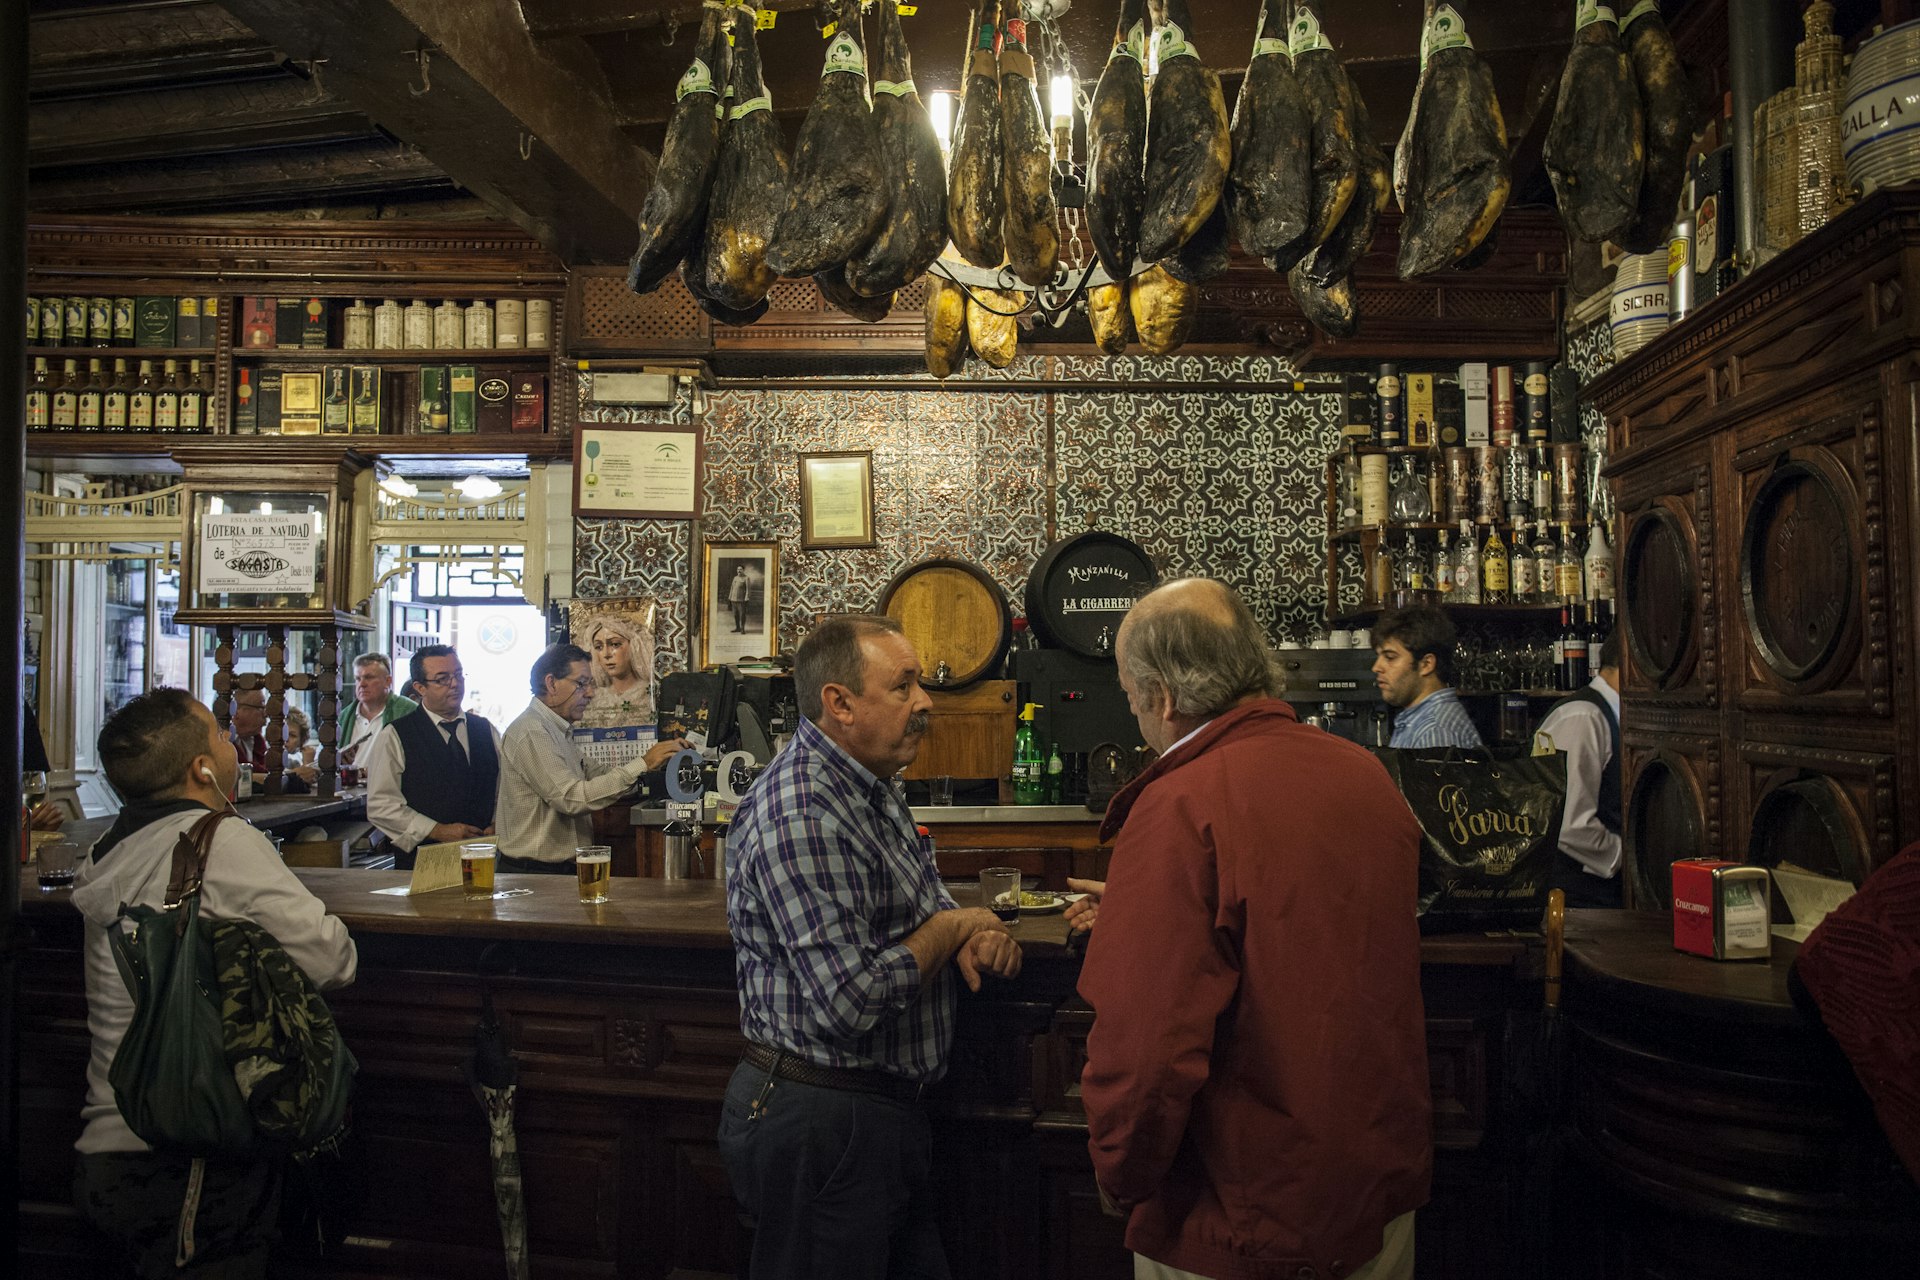 Beer, wine and tapas at El Rinconcillo, one of Seville's oldest bars